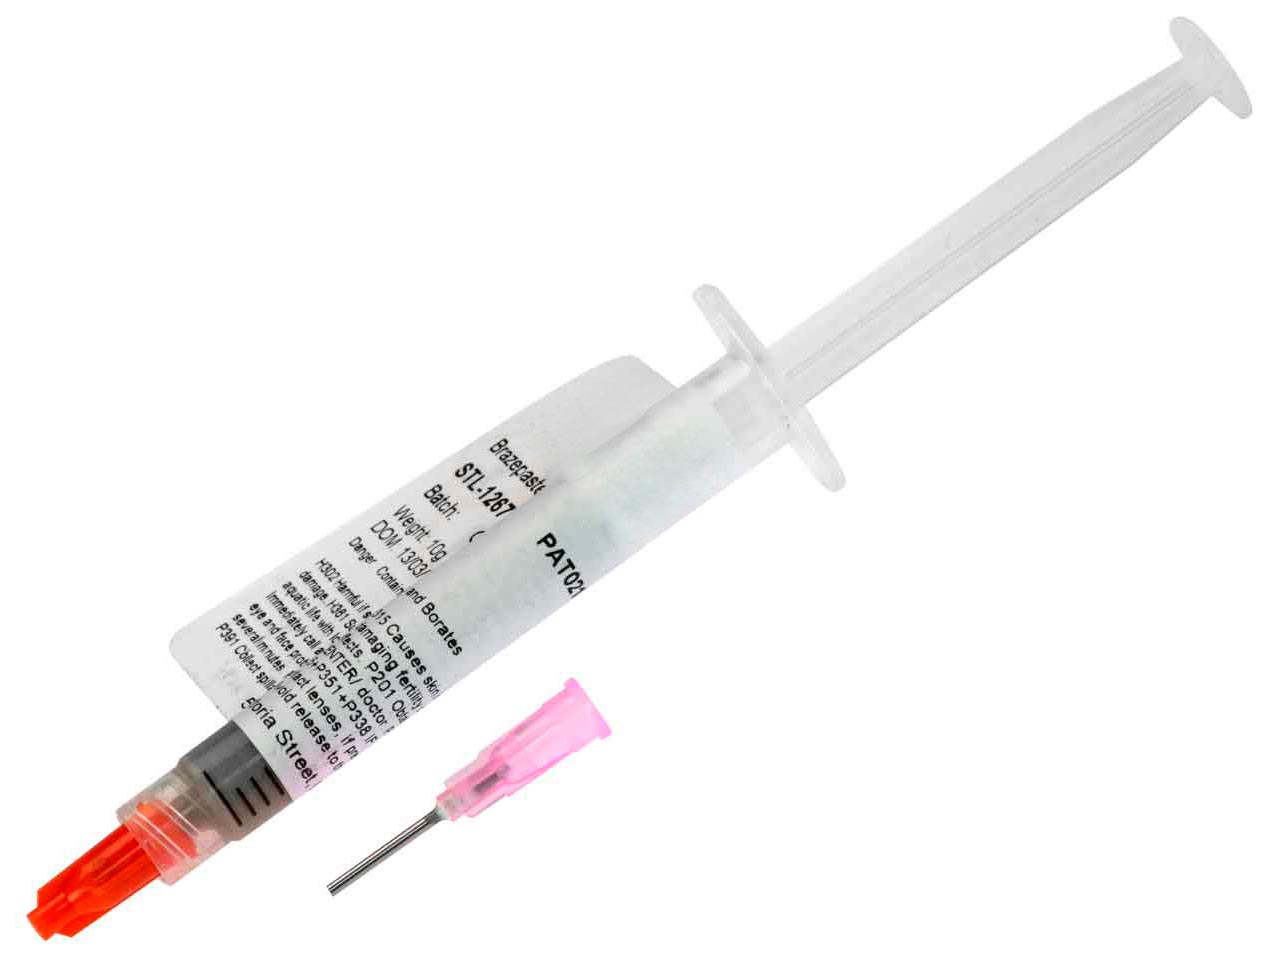 Silver Solder Paste 10g Easy Syringe Questions & Answers